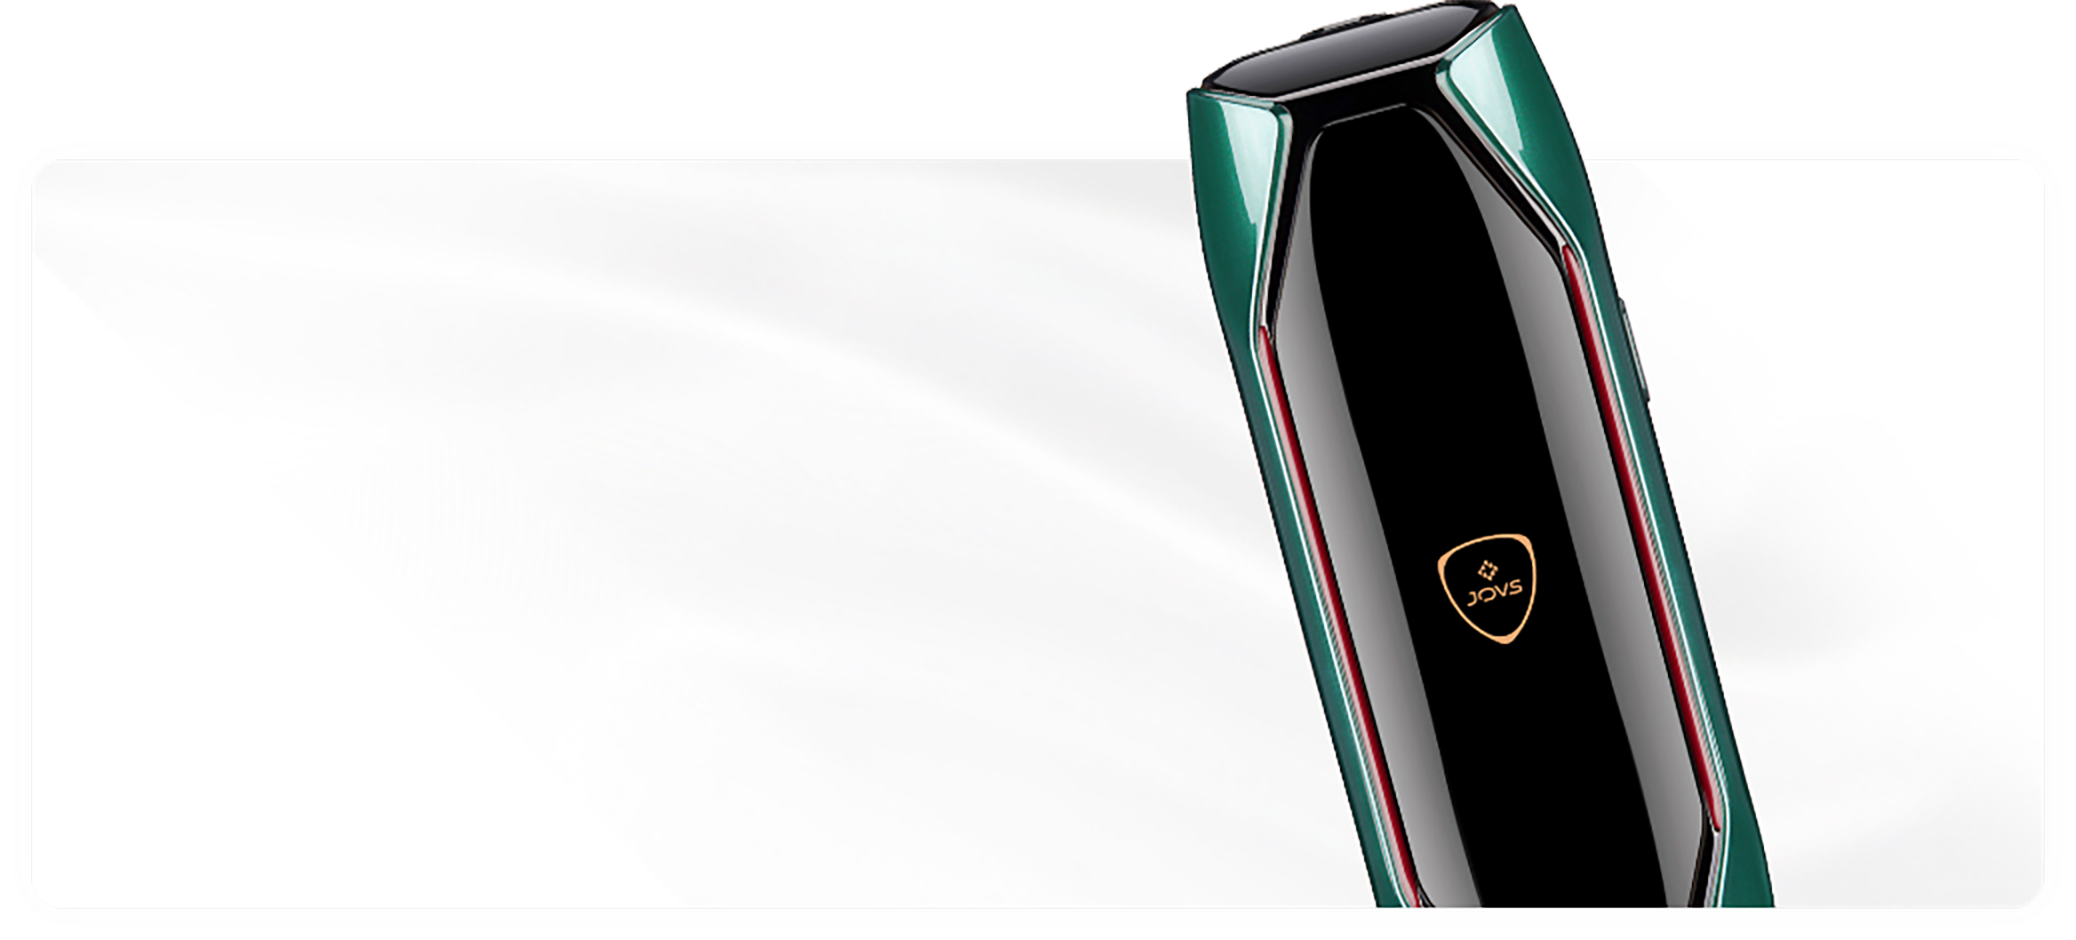 JOVS X 3-in-1 Hair Removal Device featuring a sleek black body with emerald green and red accents, gold logo, and ergonomic design for versatile use